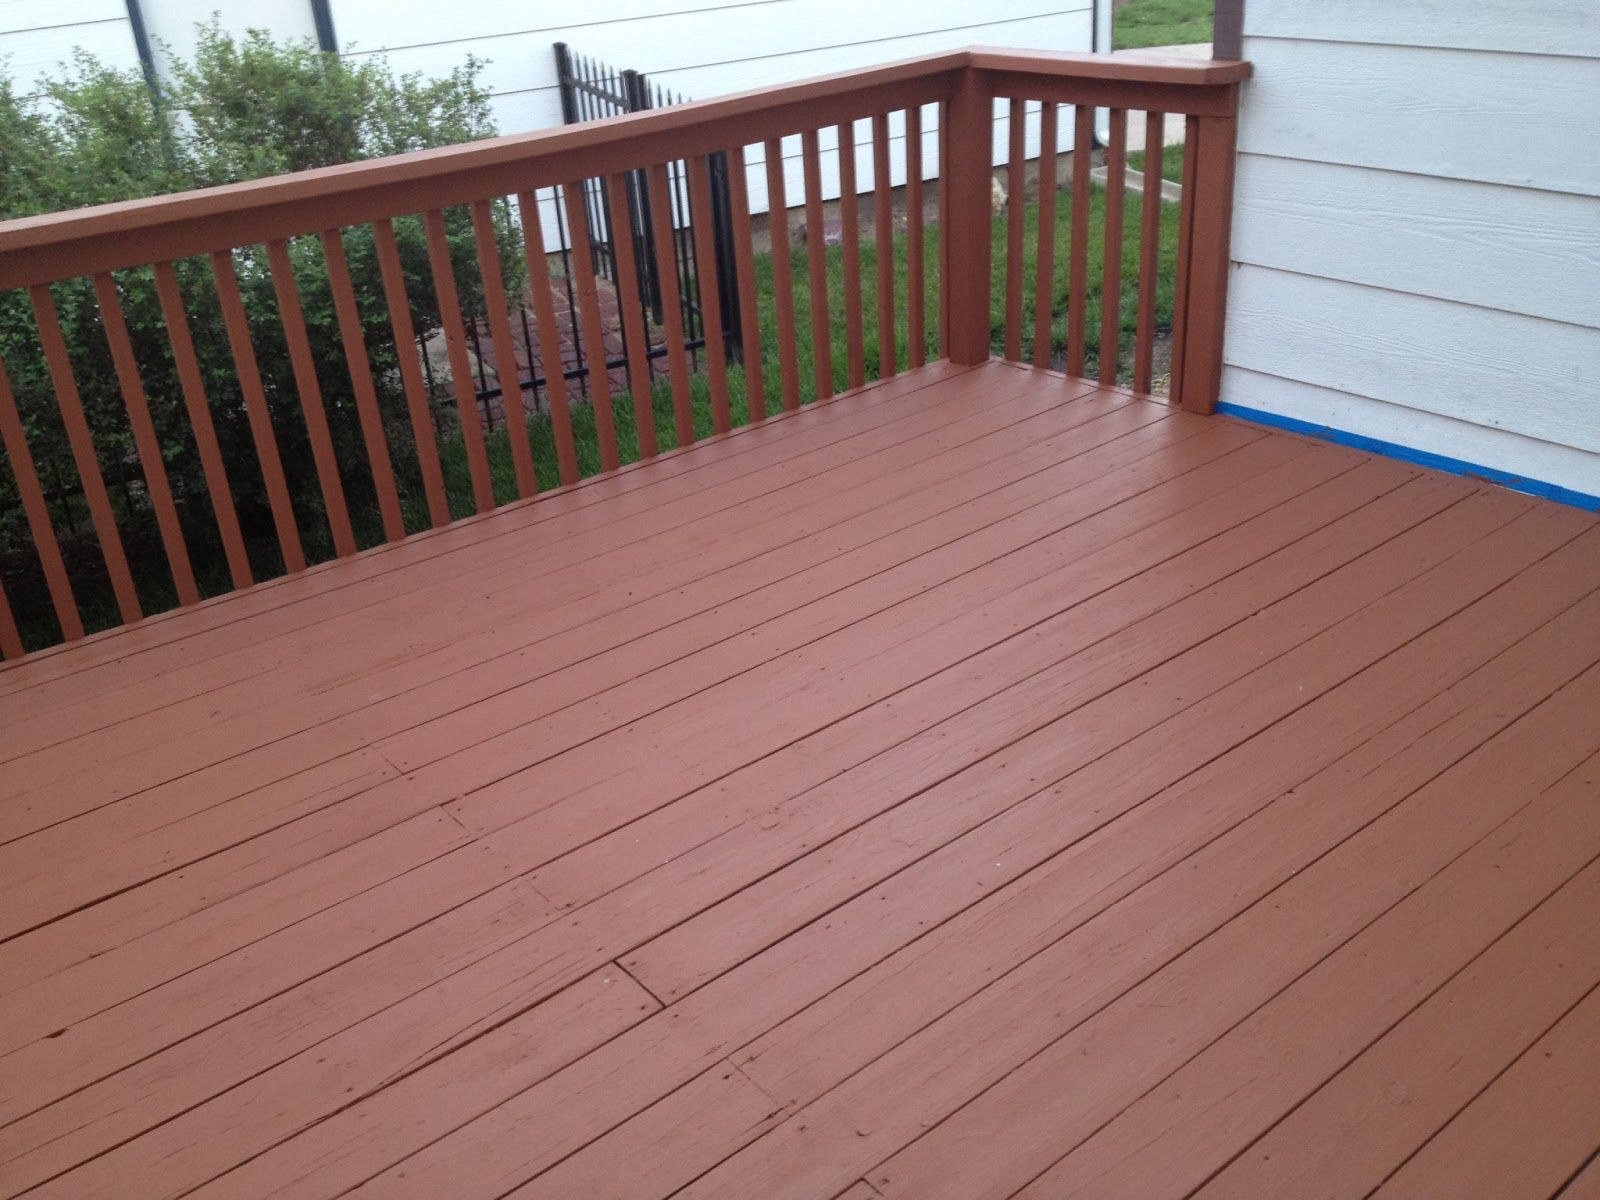 Painted Deck Colors
 Behr Deckover Cappuccino Solid Color